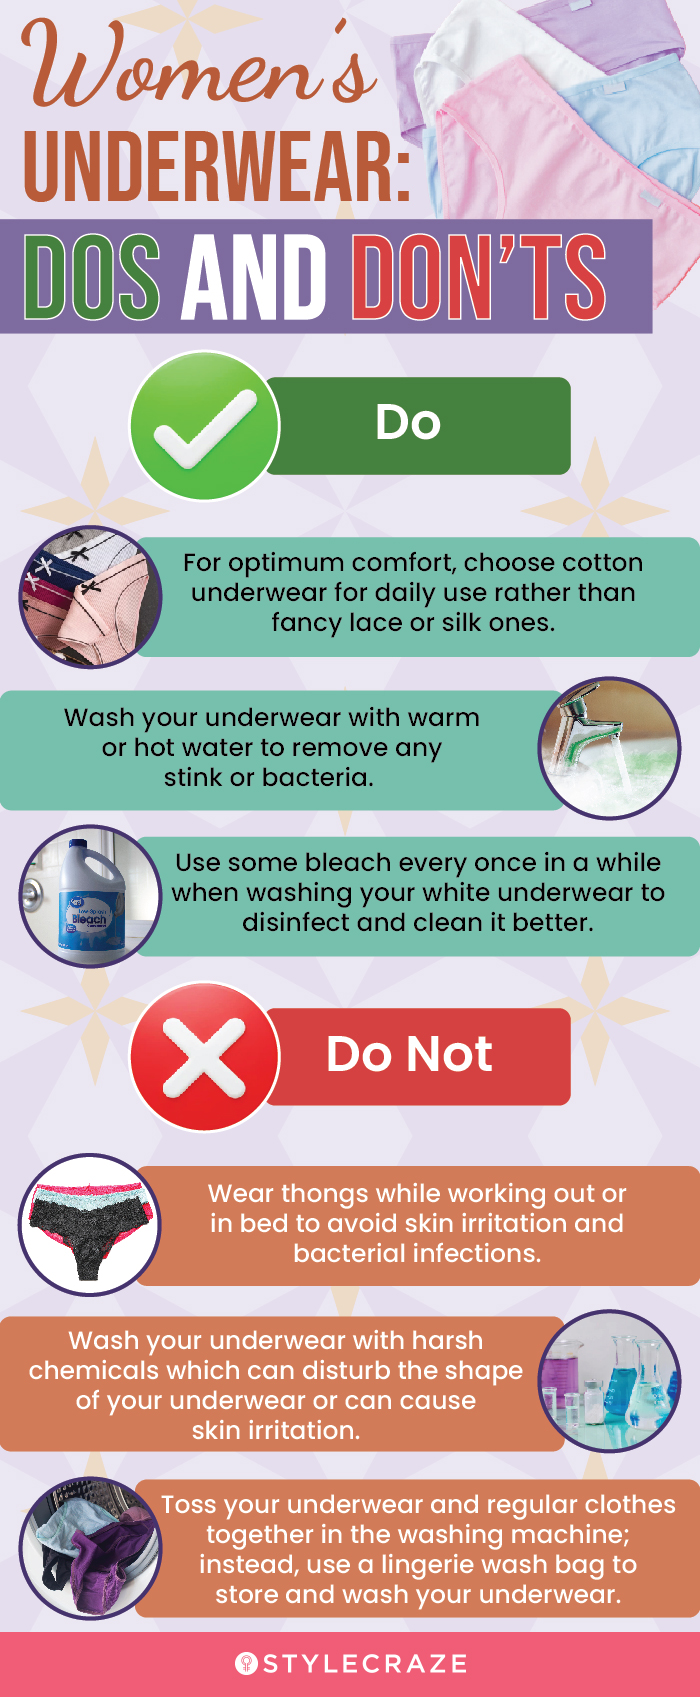 Women’s Underwear: Dos And Don’ts [infographic]